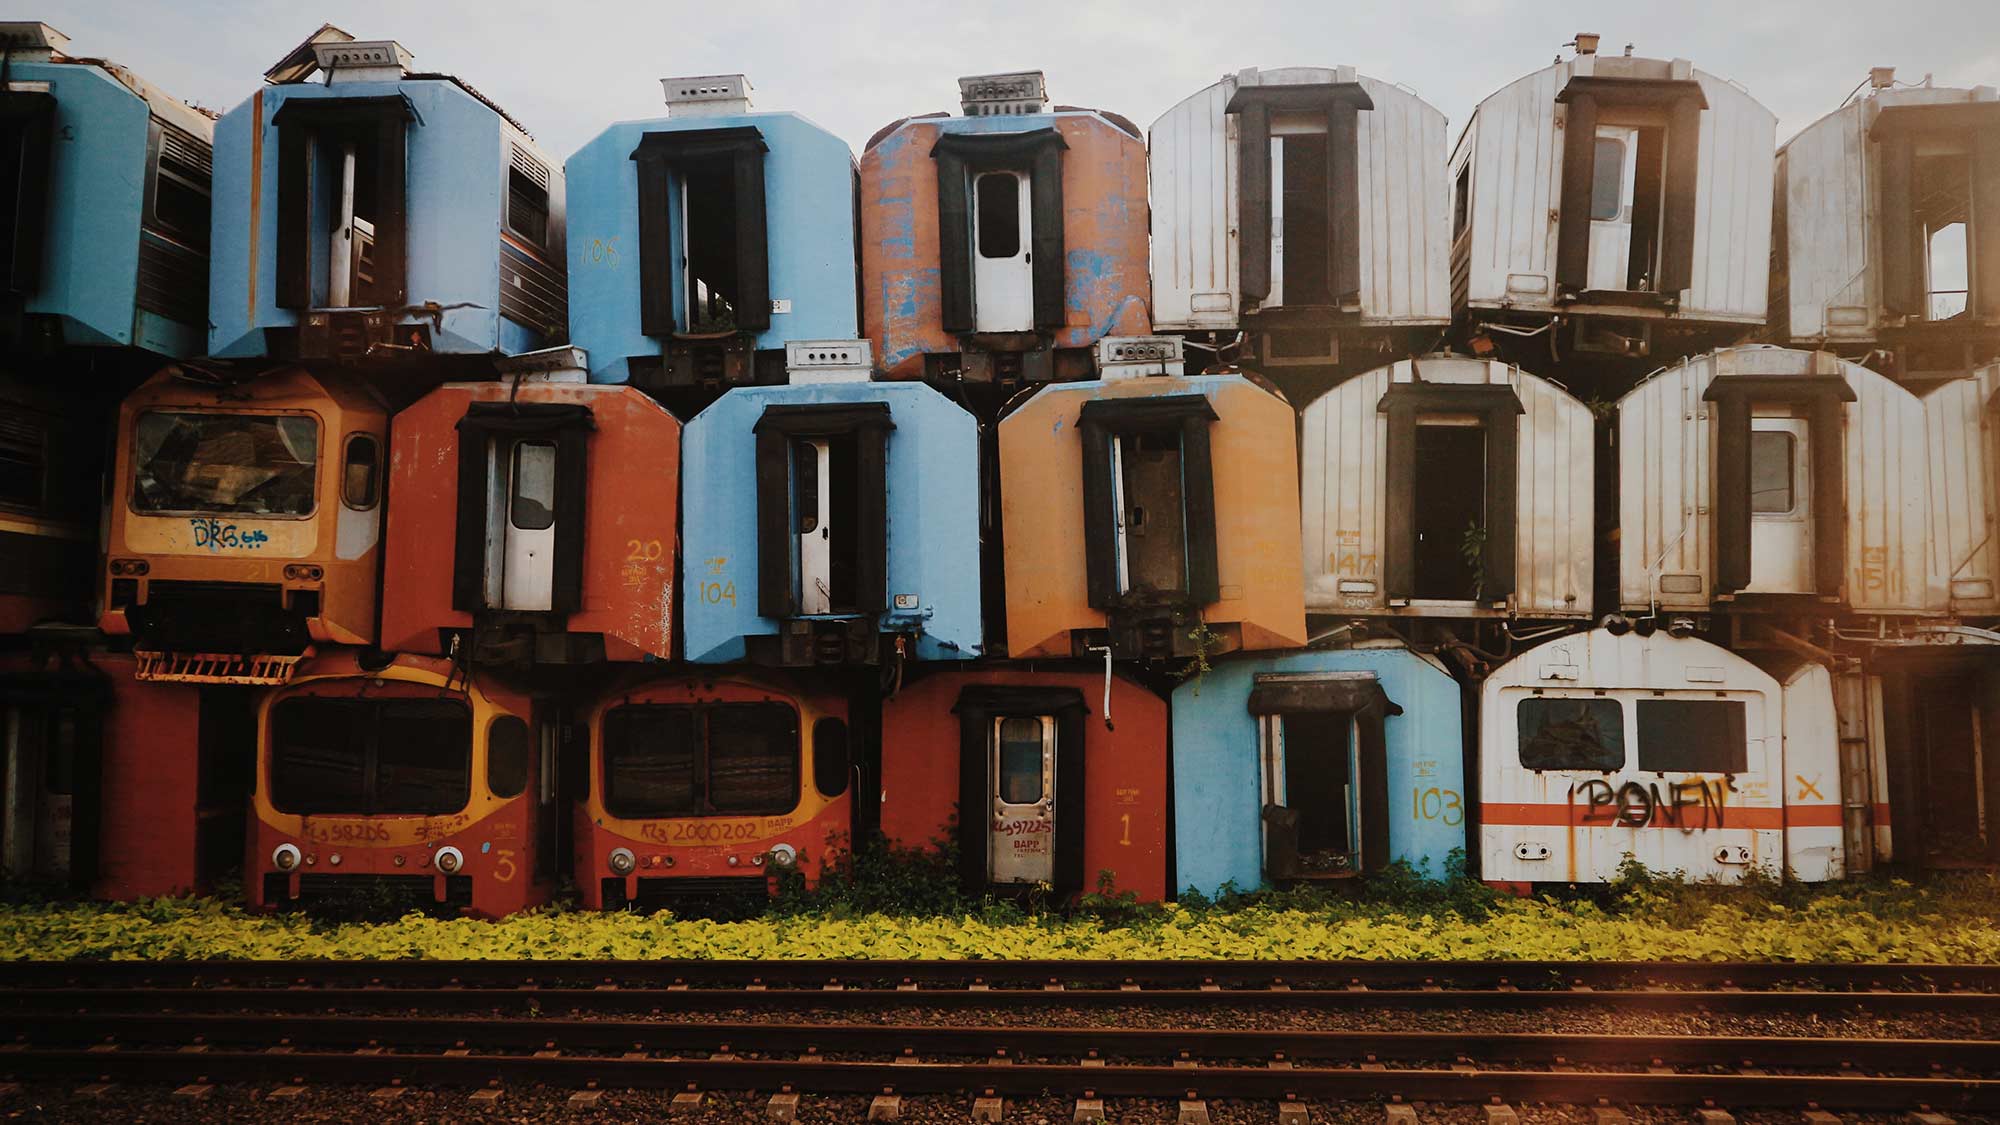 Old train carriages stacked upon one another